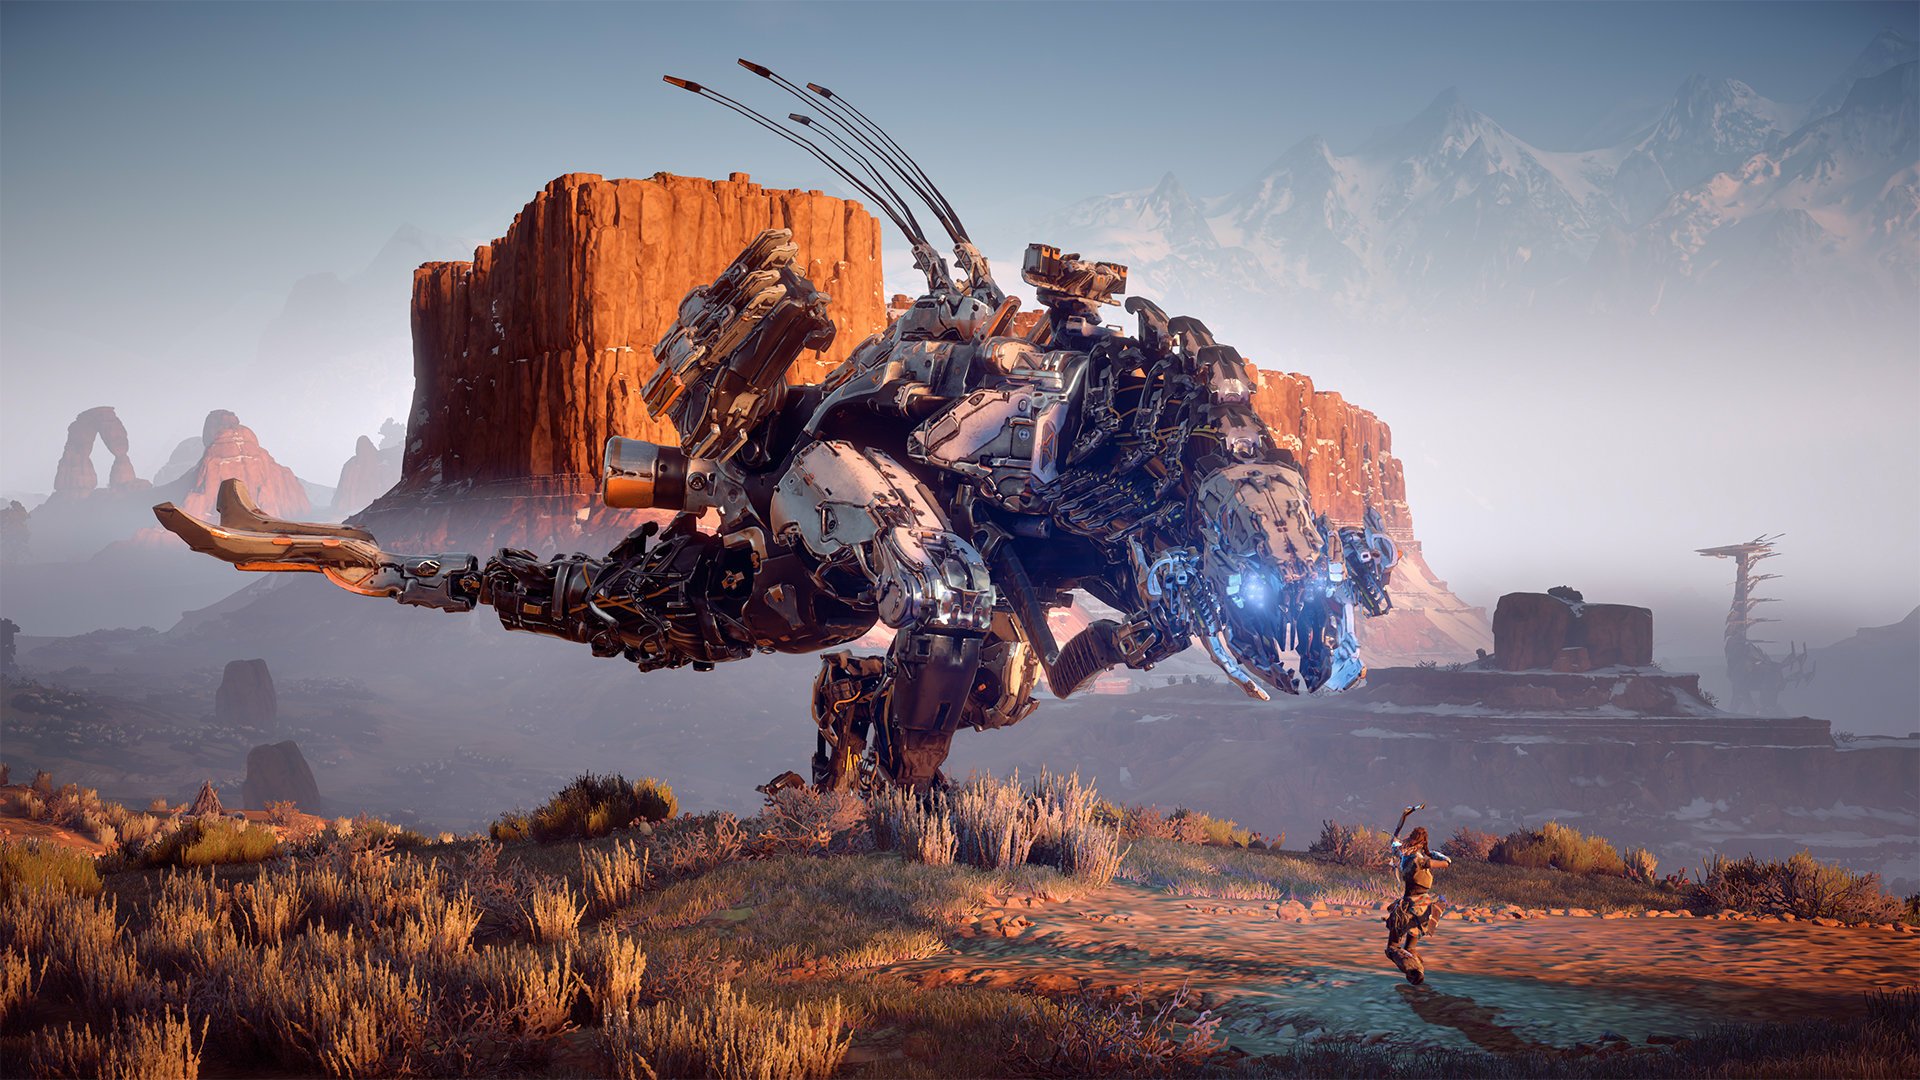 8 Horizon Zero Dawn Hd Wallpapers Background Images Wallpaper Abyss